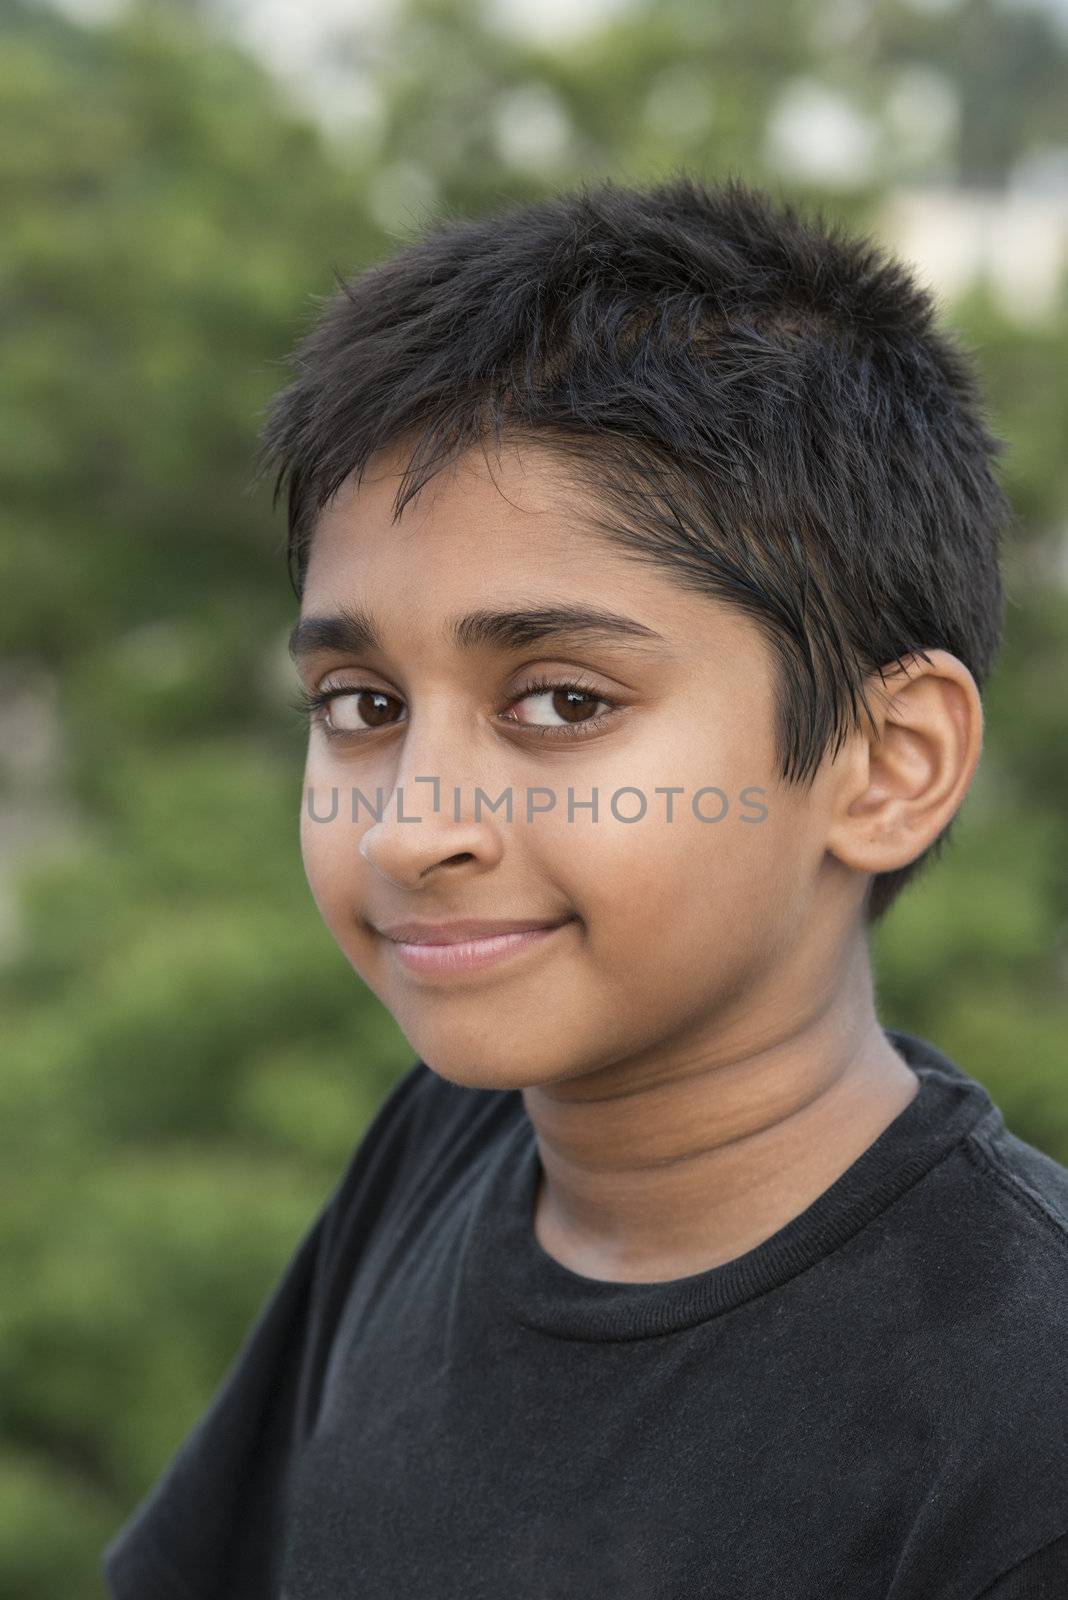 Handsome Indian toddler standing outdoor smiling